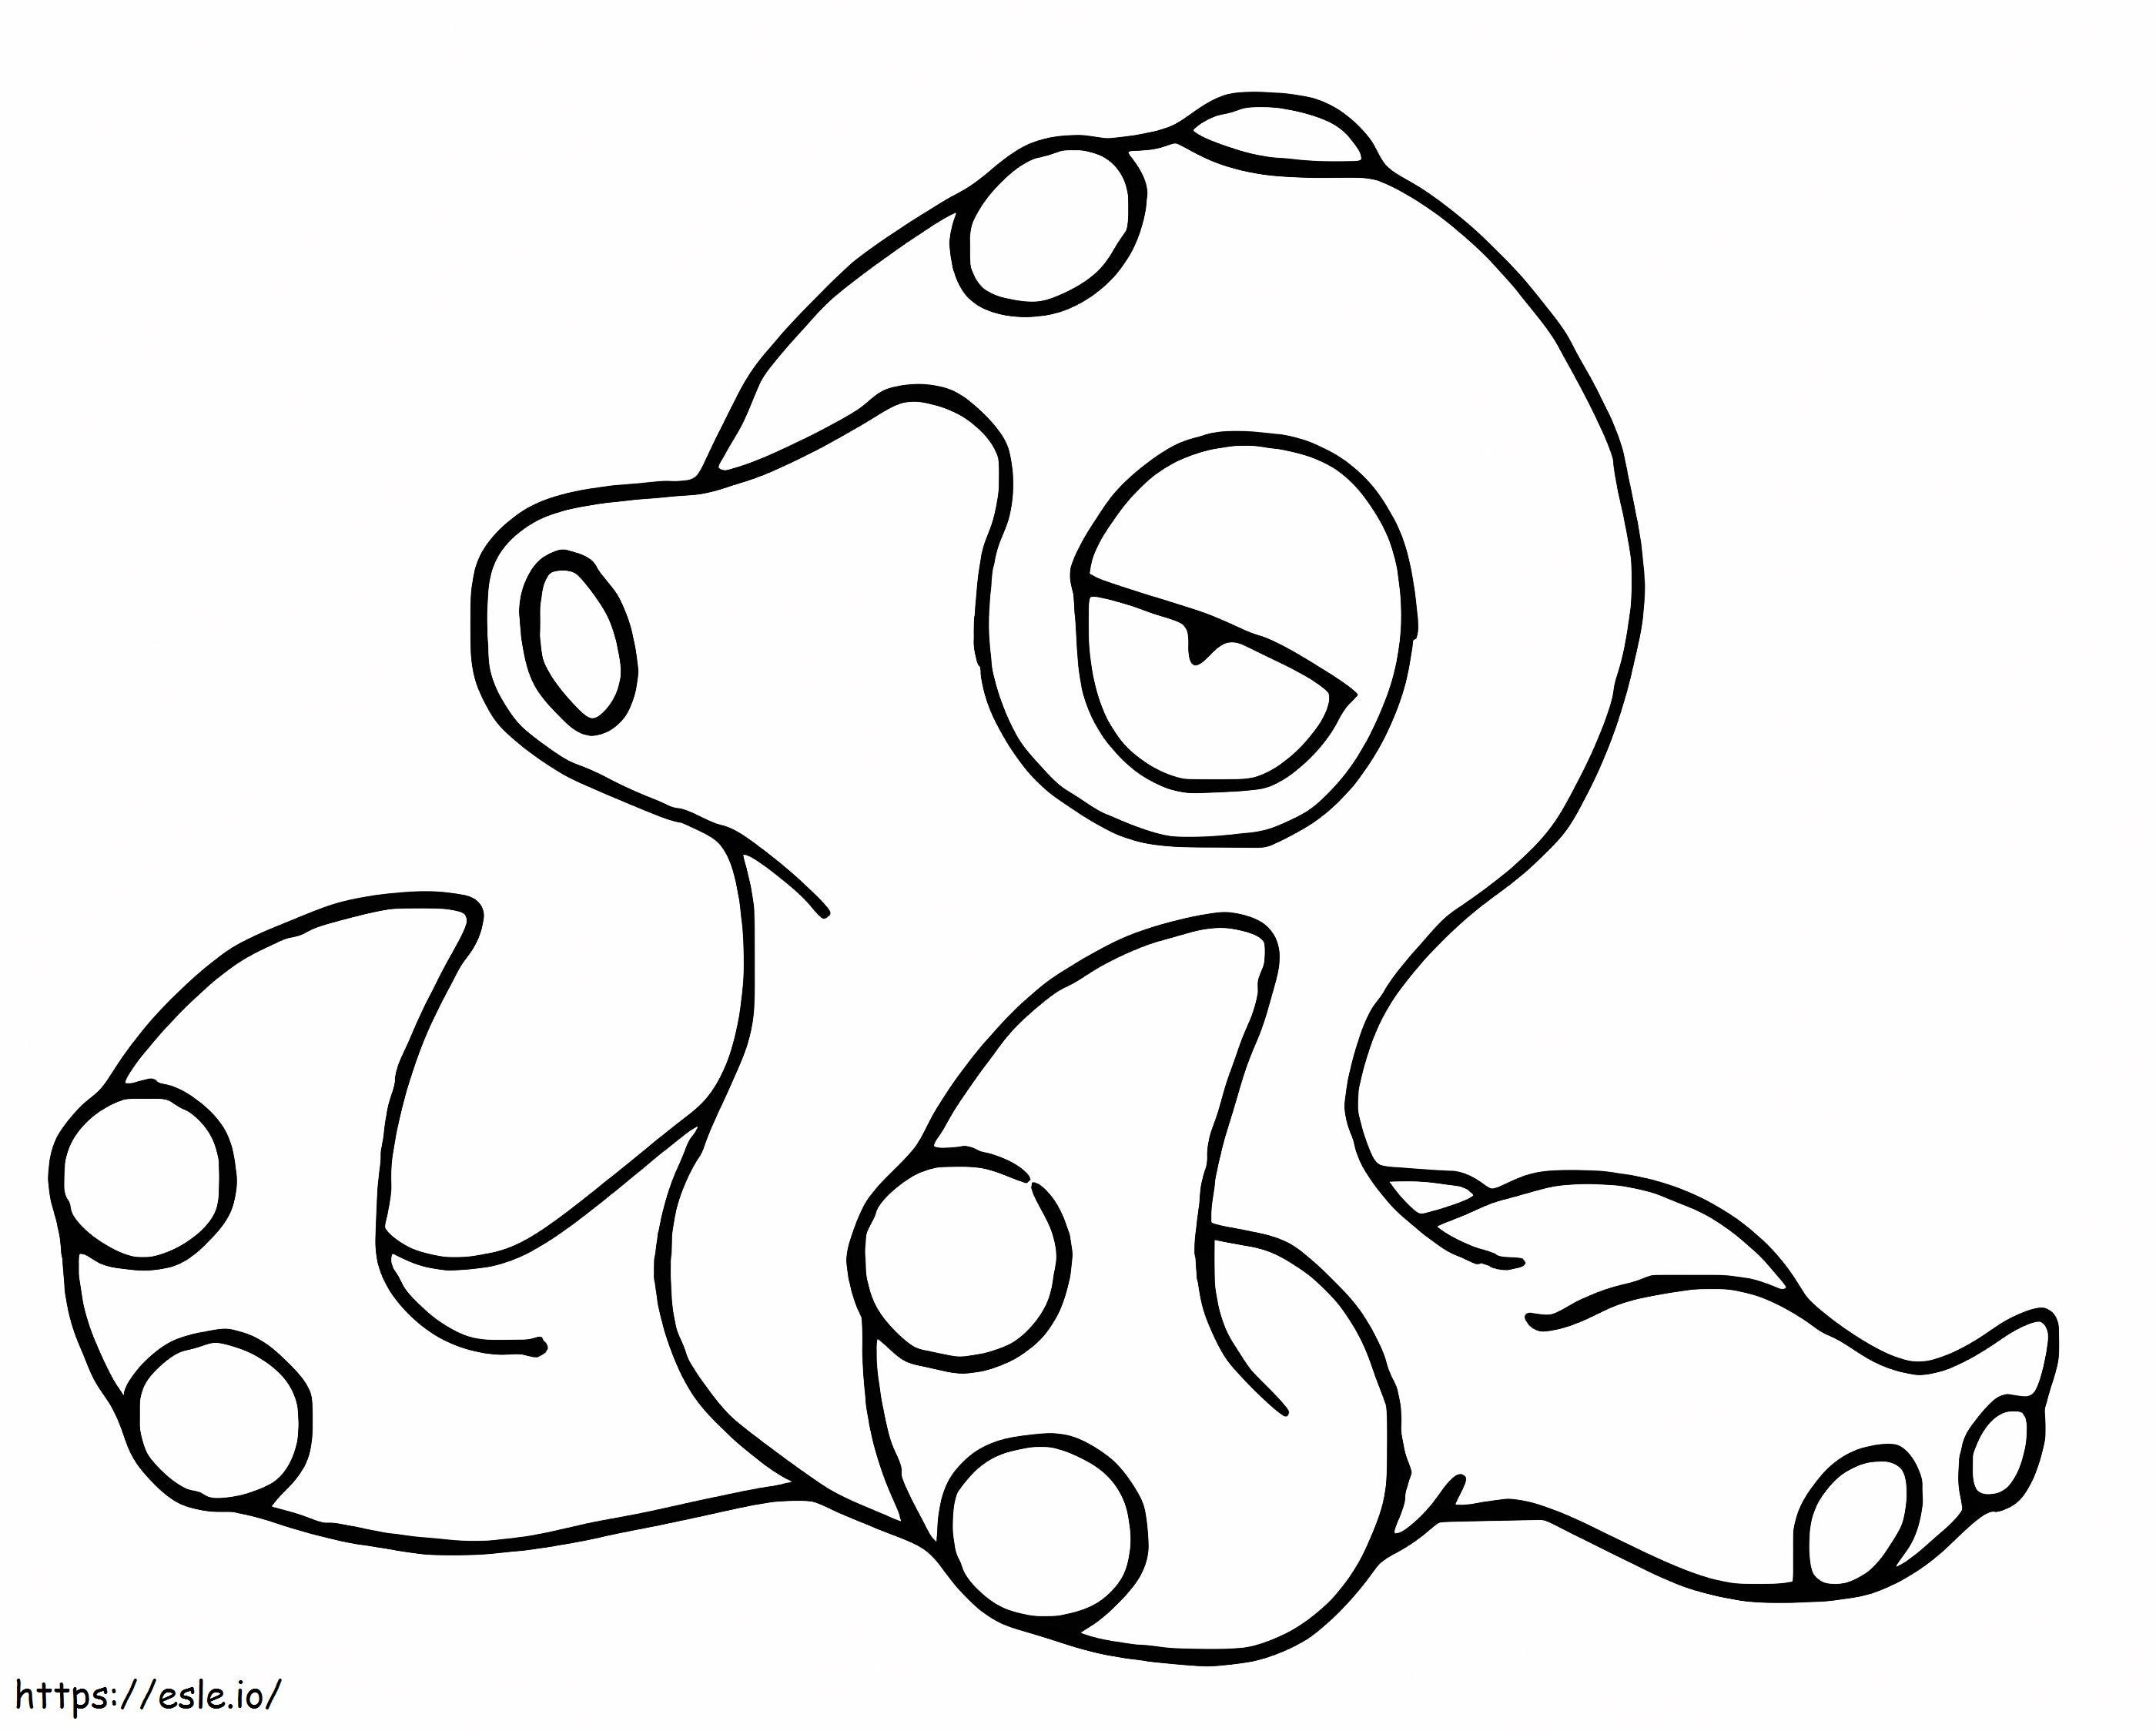 Pokemon Octillery coloring page